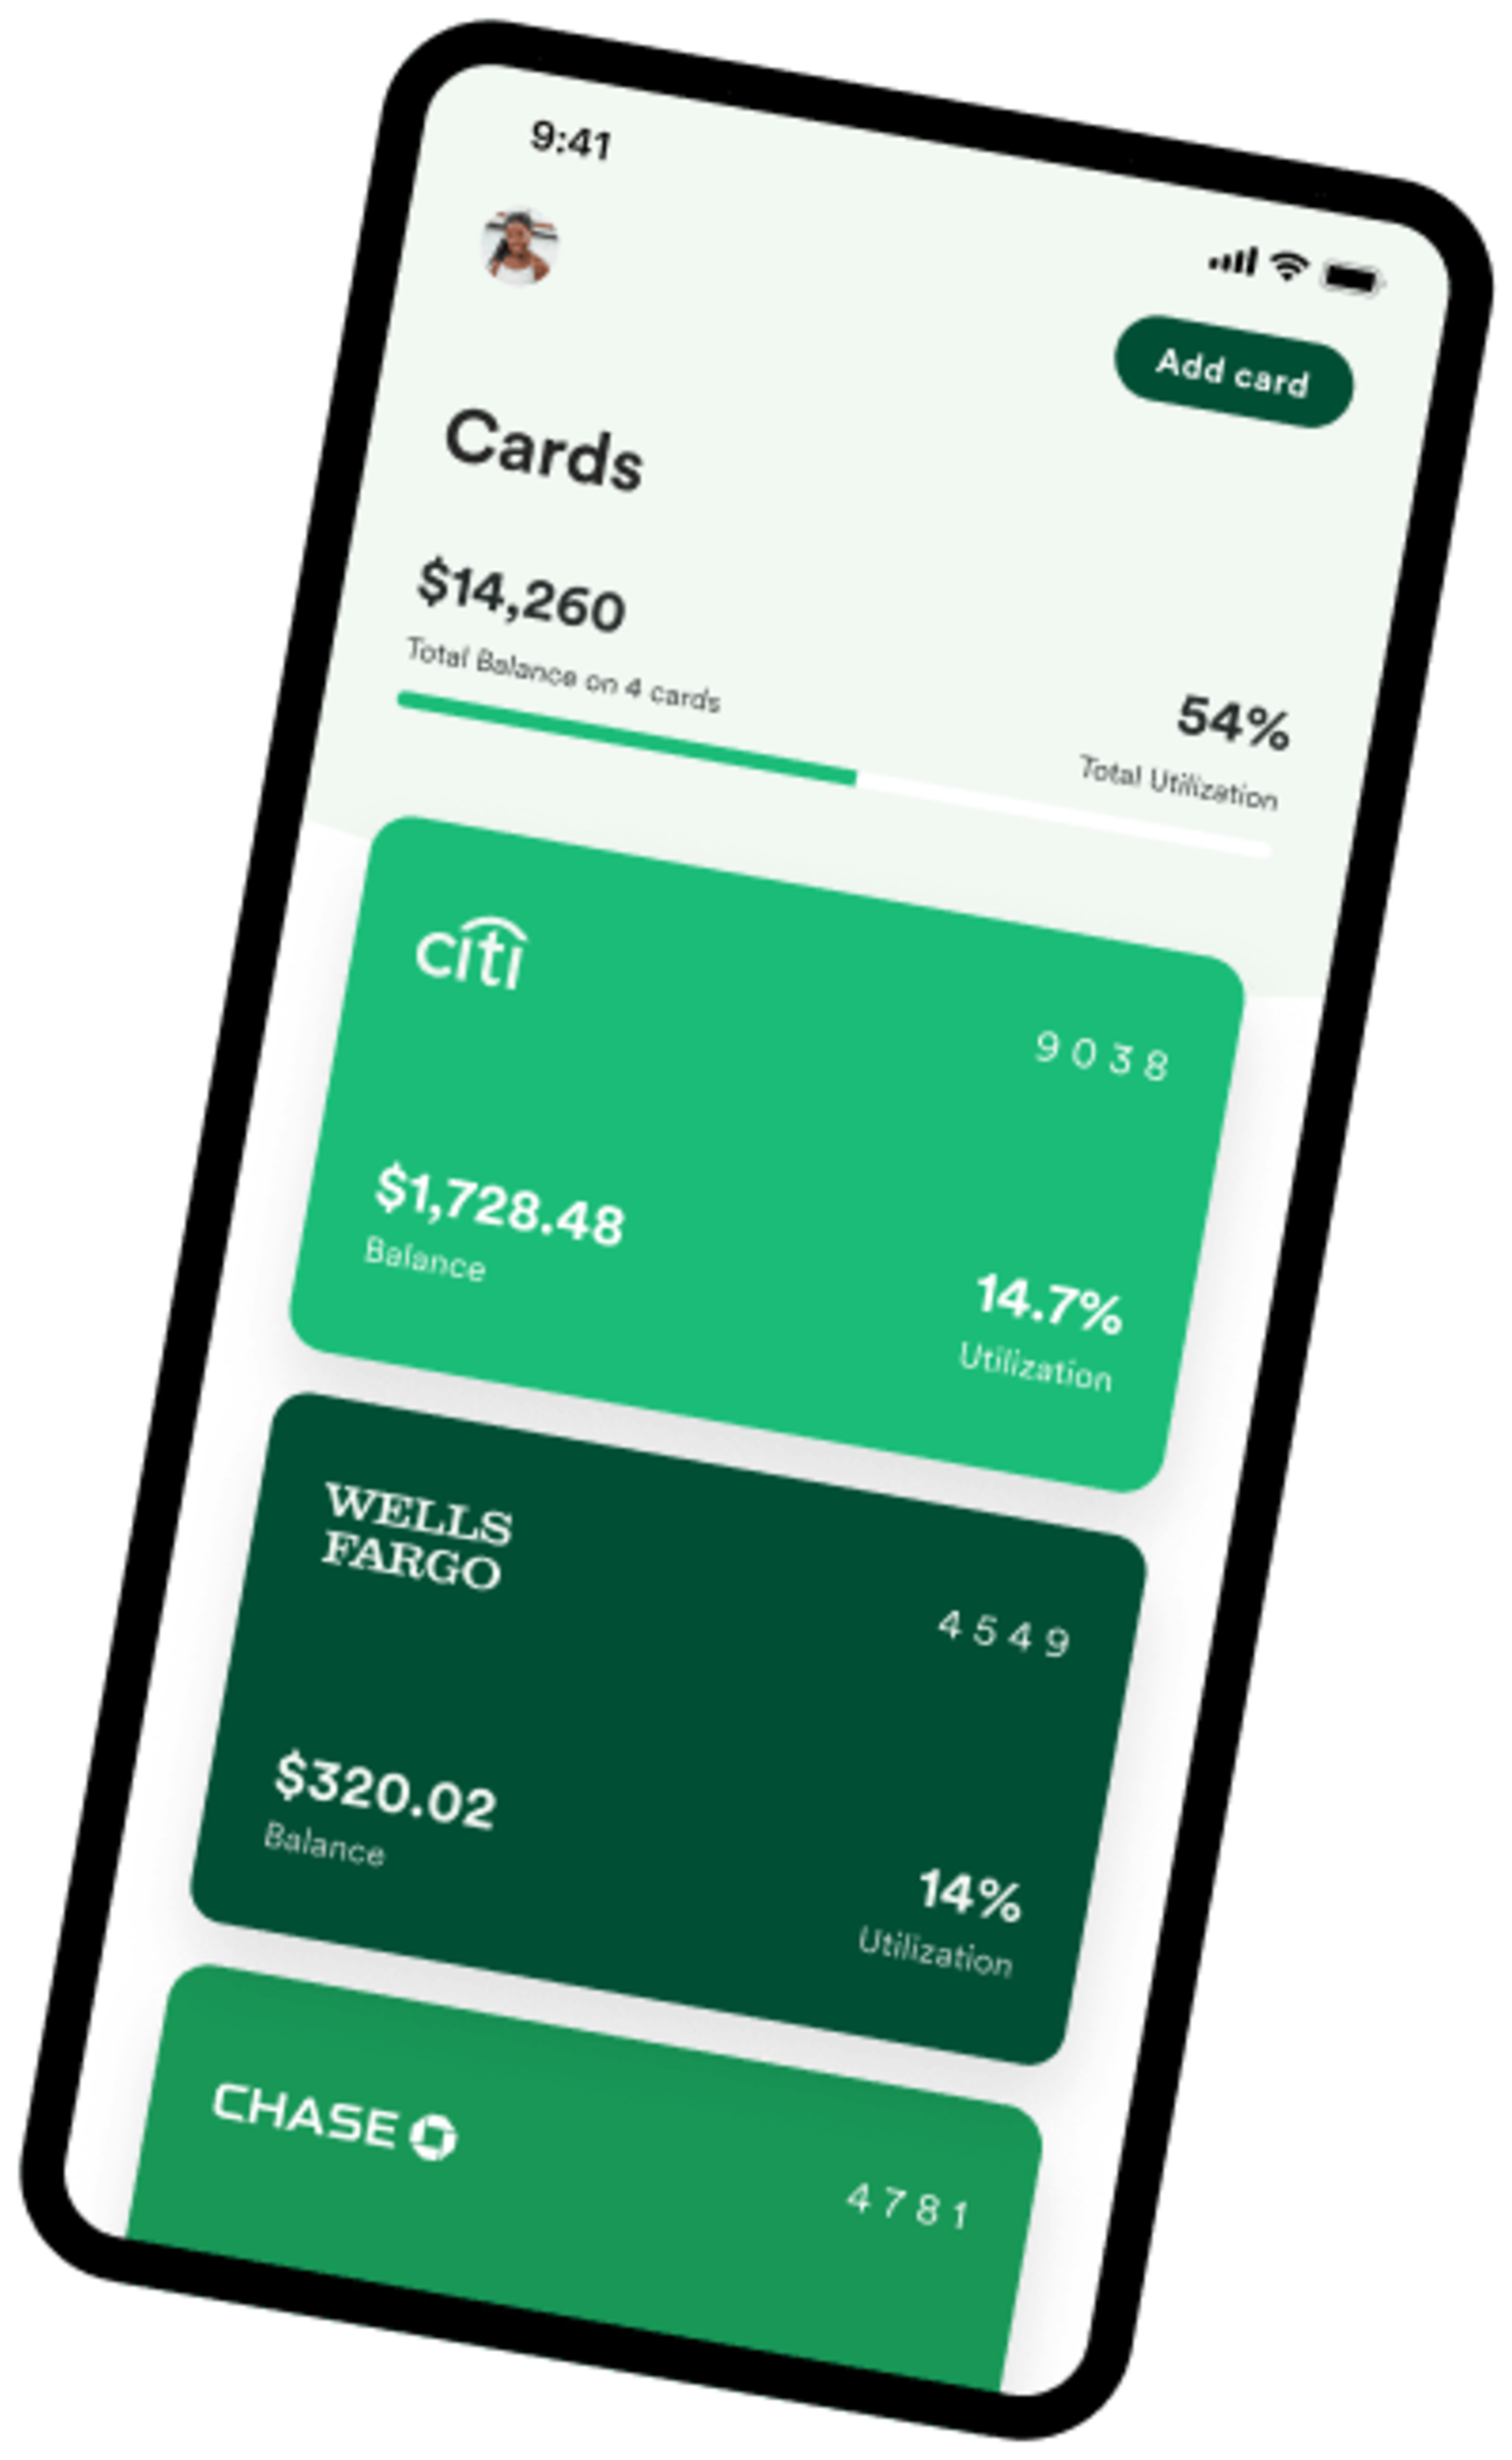 alt="All your credit cards in one place with Tally"